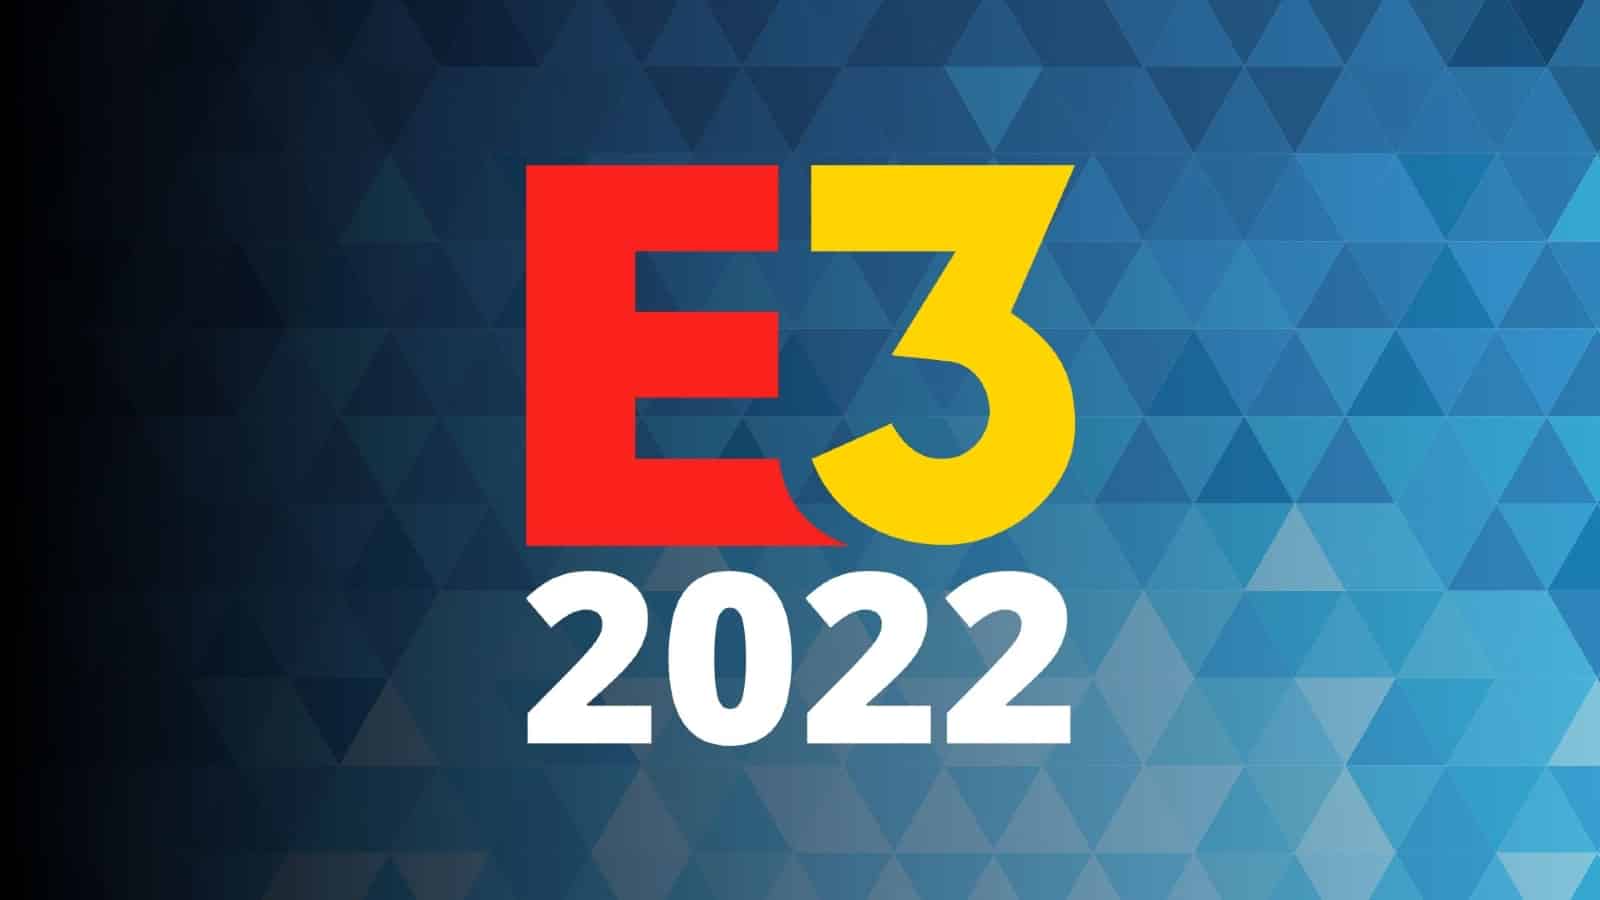 How to Watch E3 2022